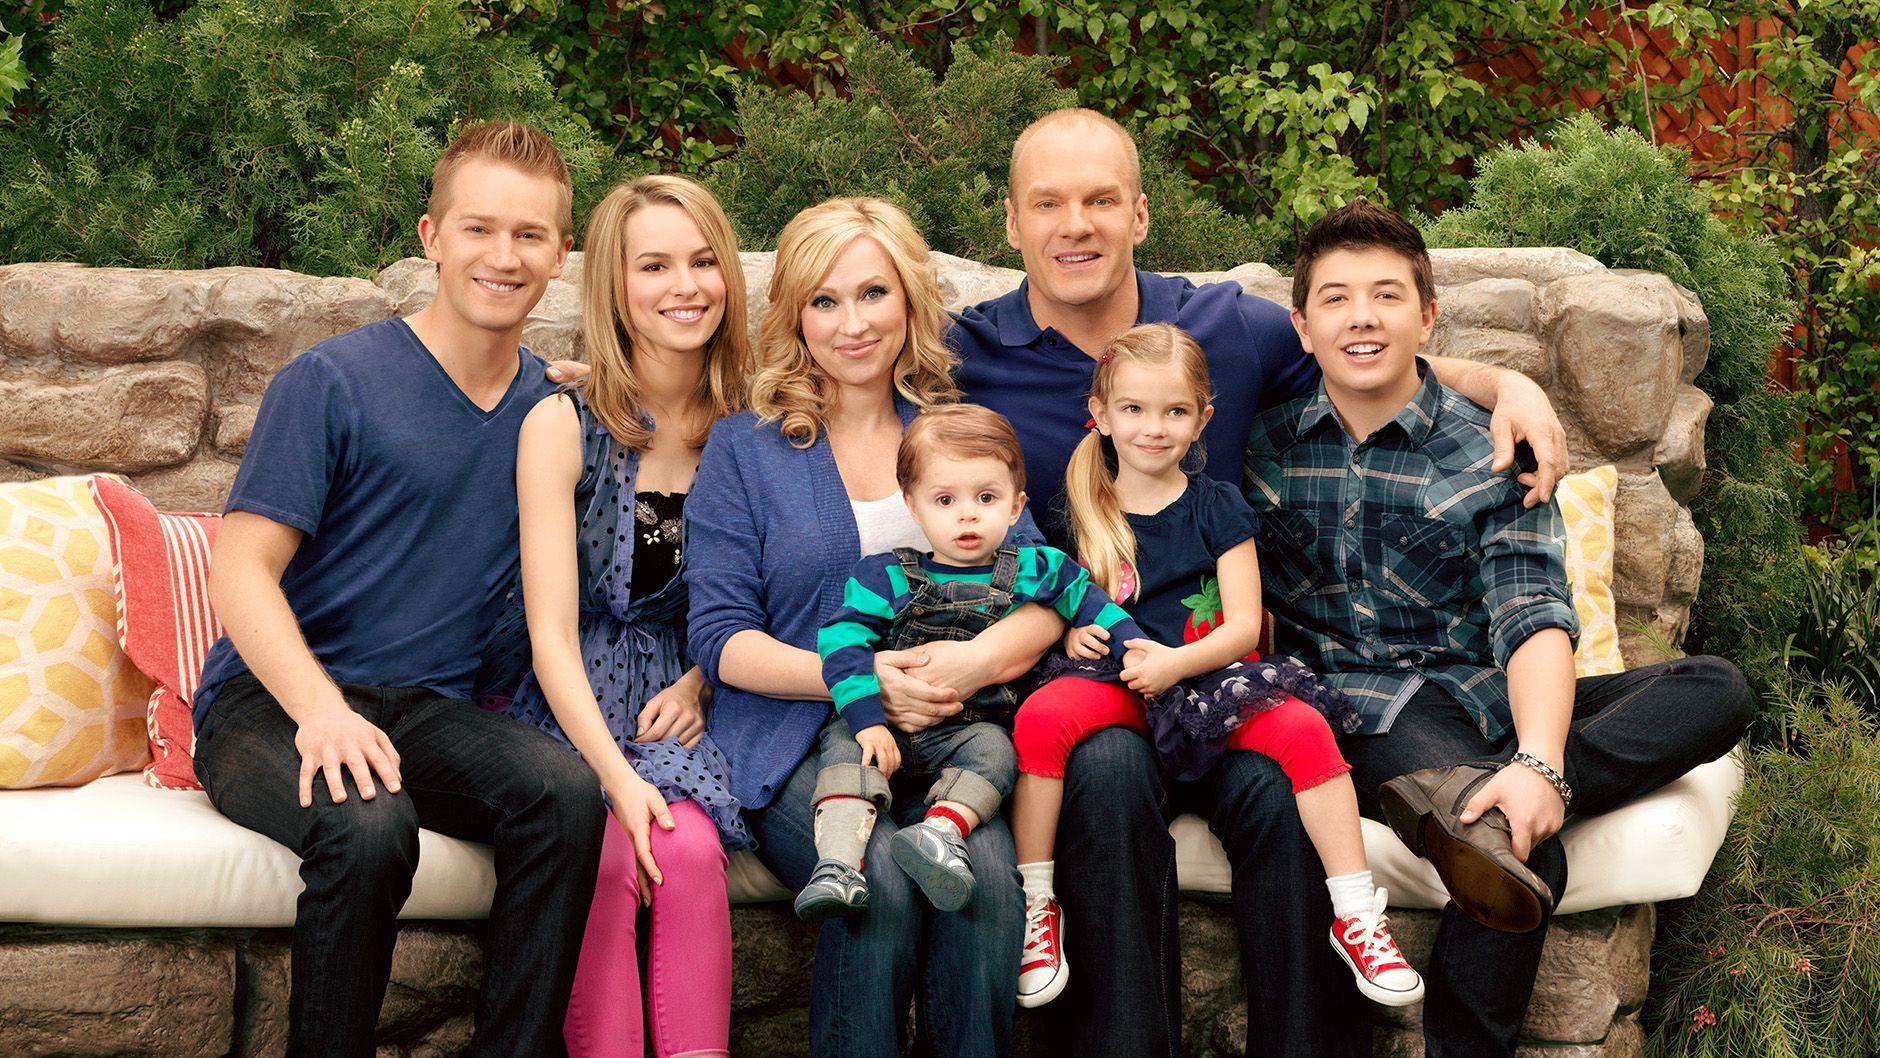 Awesome Good Luck Charlie Wall Paper. Good Luck Charlie Wallpaper